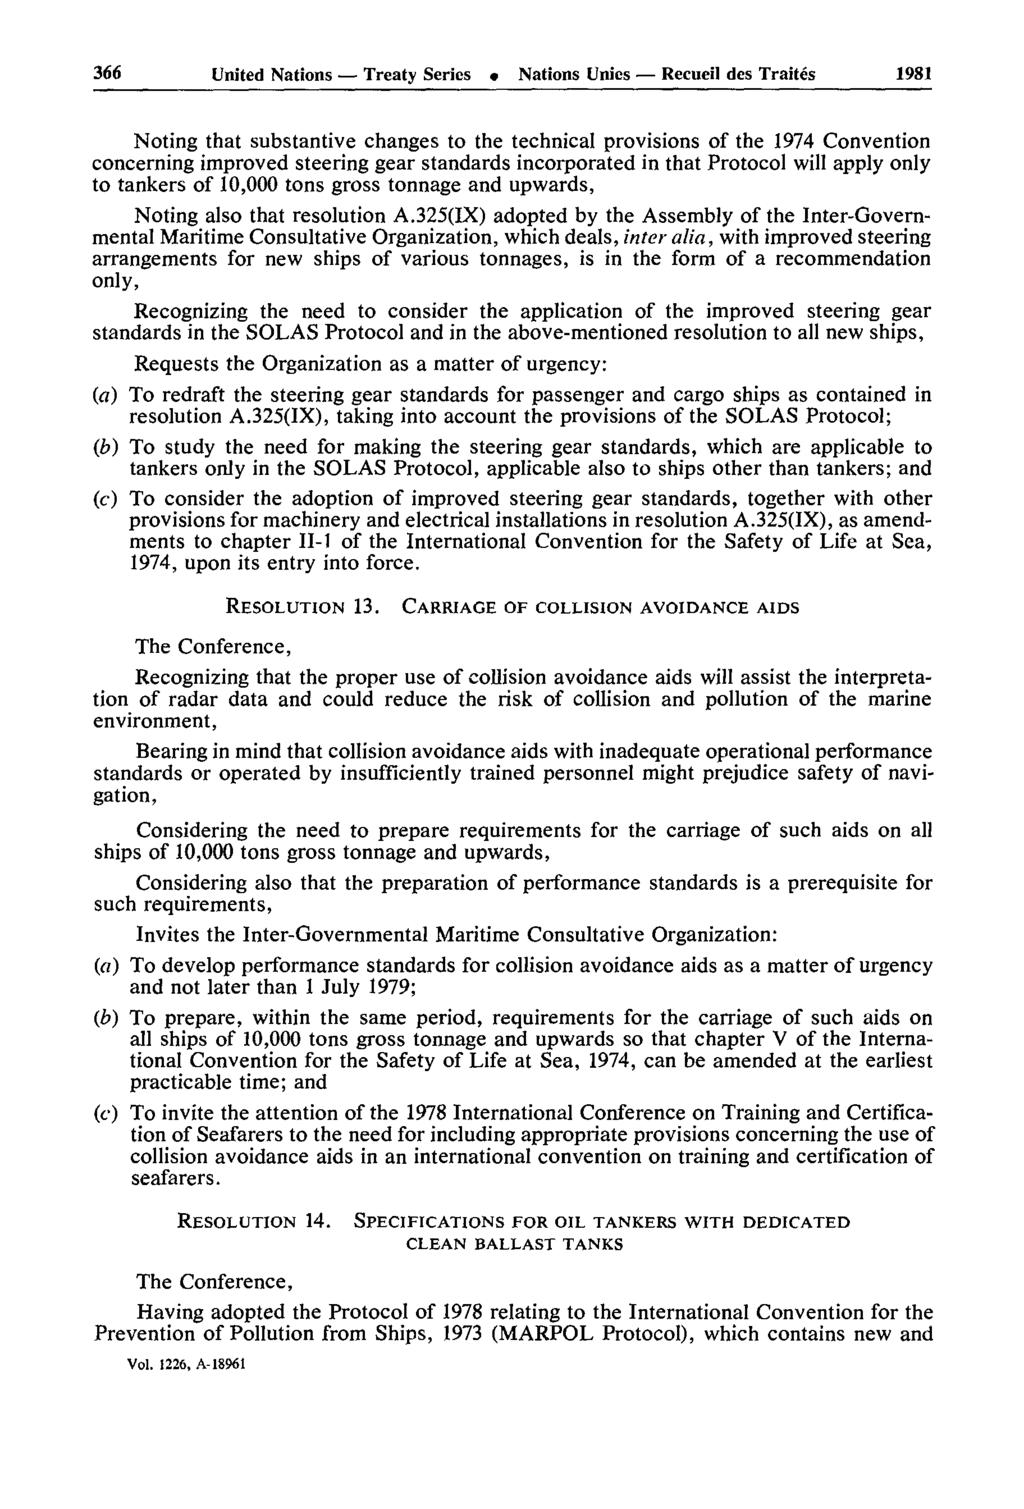 366 United Nations Treaty Series Nations Unies Recueil des Traités 1981 Noting that substantive changes to the technical provisions of the 1974 Convention concerning improved steering gear standards